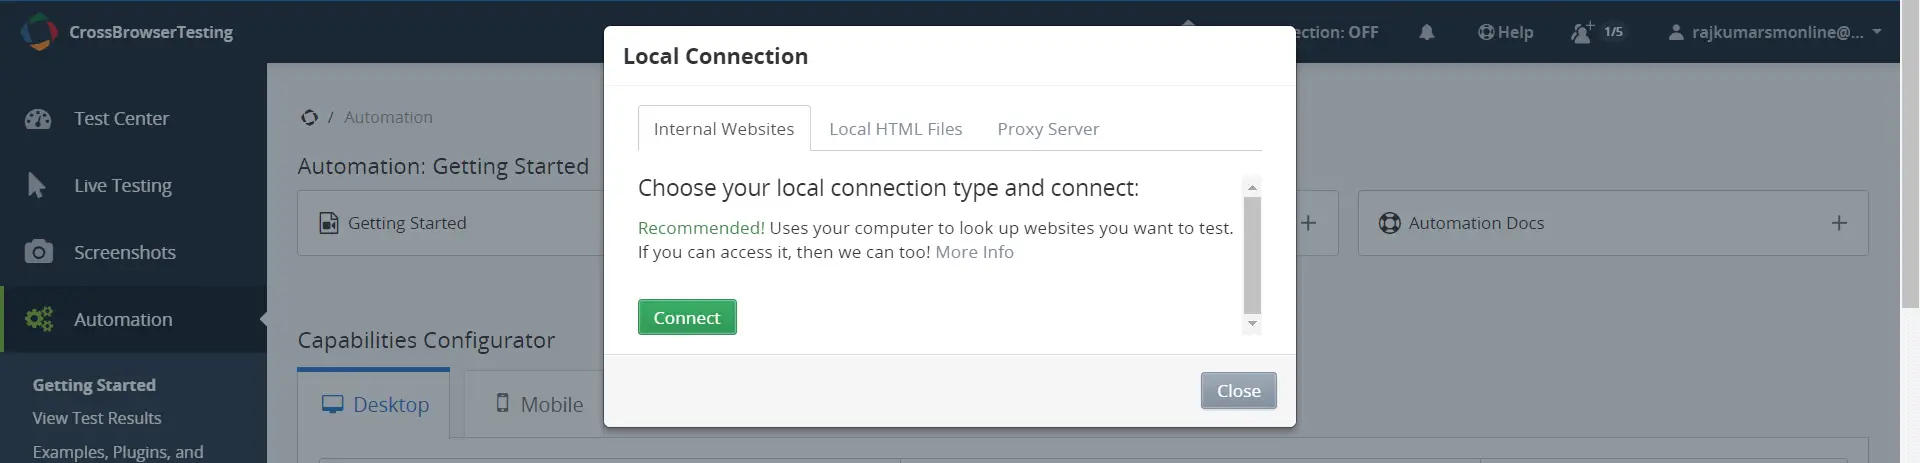 local connections crossbrowsertesting